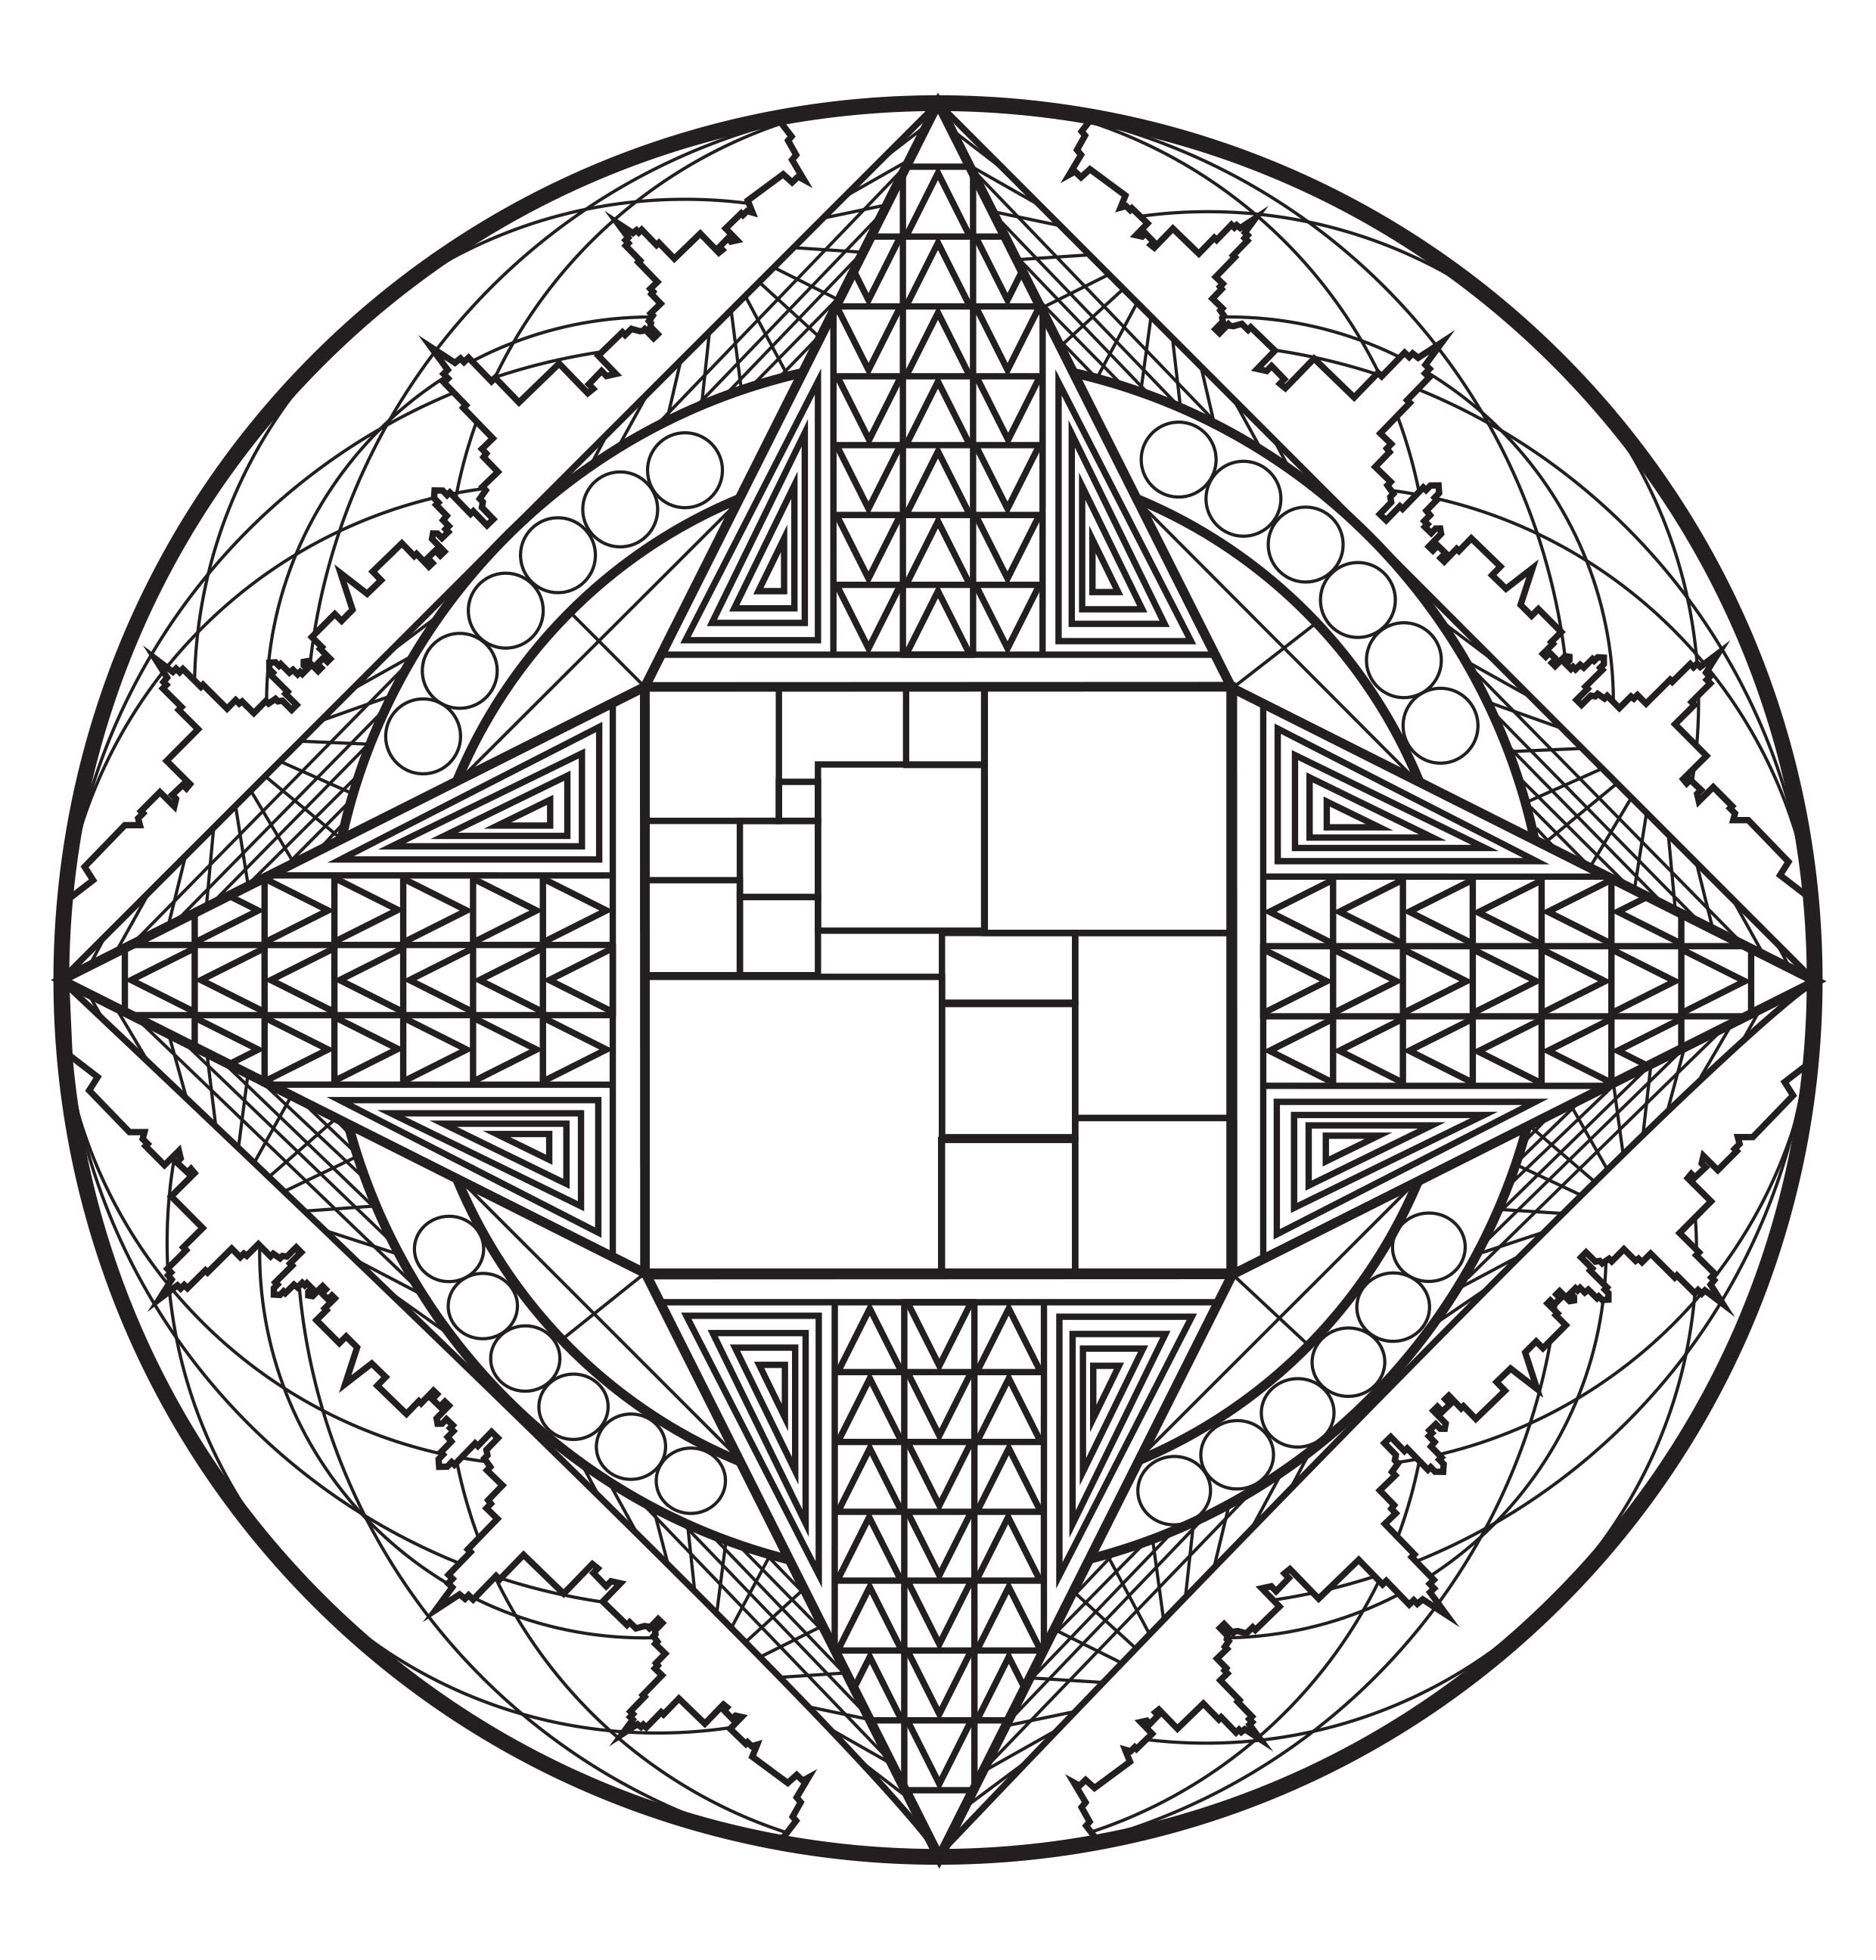 Many small patterns and little details for a Mandala coloring page of good quality. Let your mind wander : this step is essential to get the most out of coloring to reduce your stress